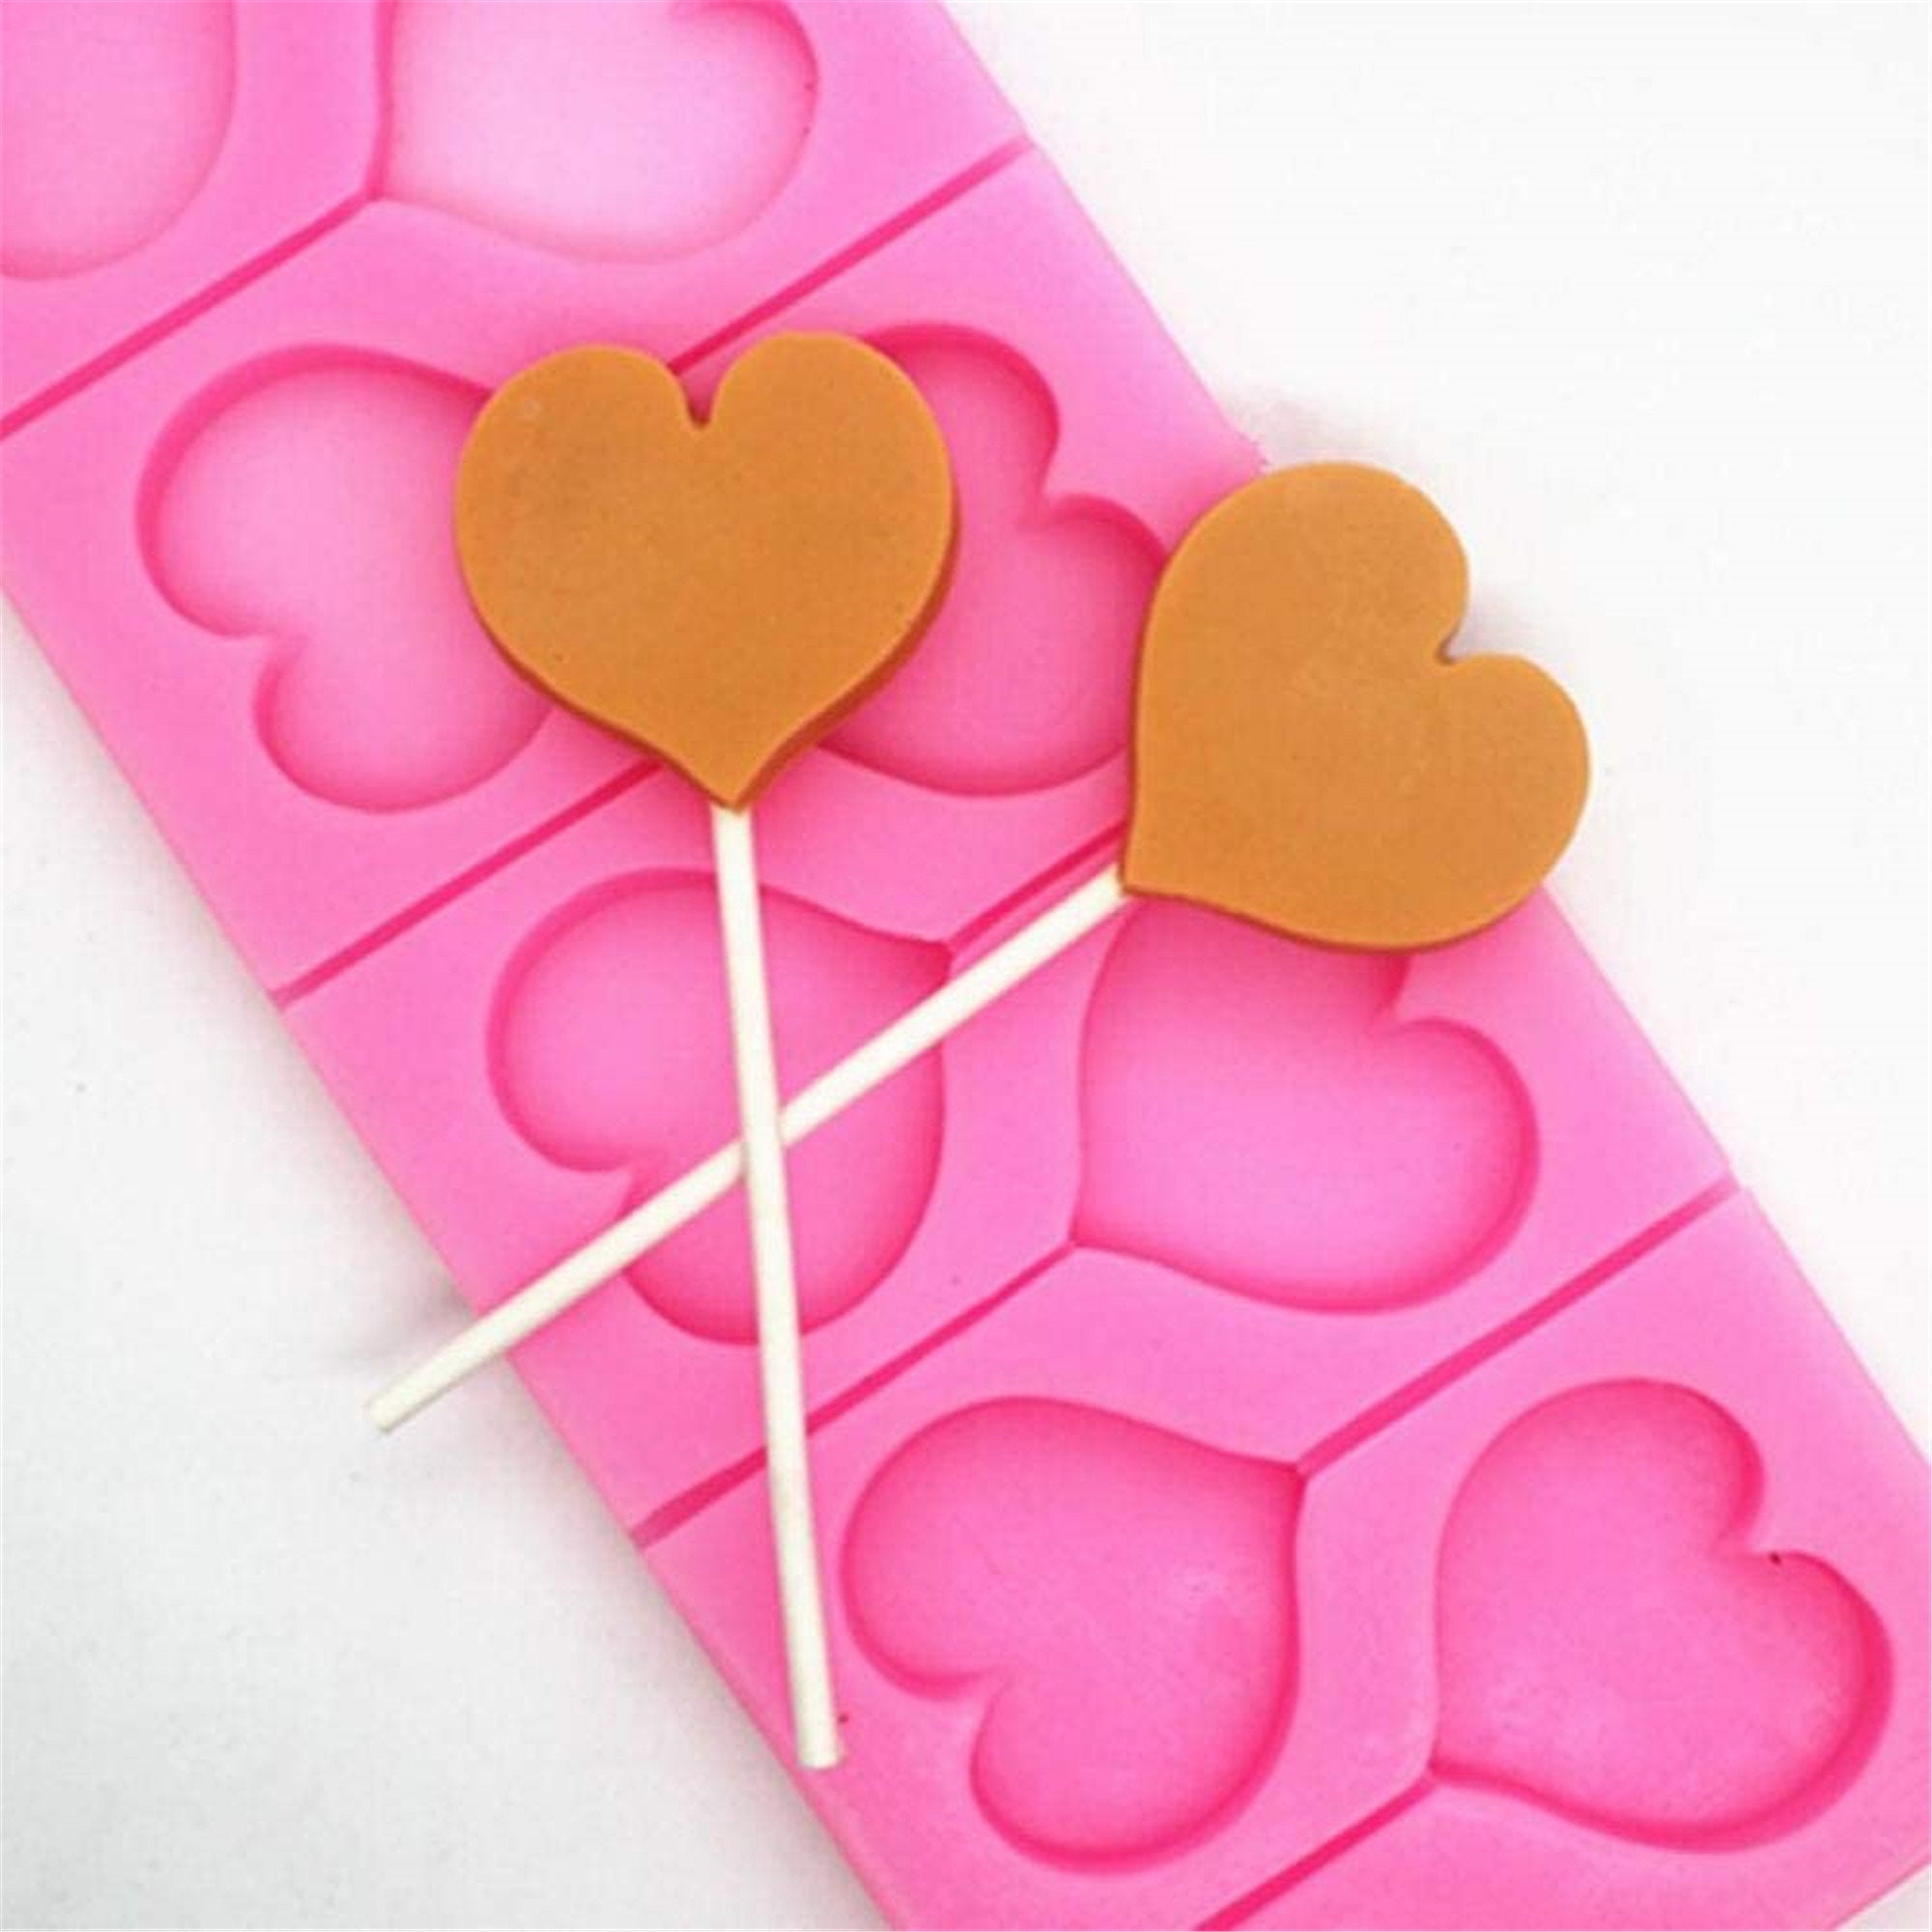 Lips Chocolate Silicone Molds, 2 Pcs Kiss Lollipop Candy Molds for Love  Valentine's Day Wedding Birthday Cake Decoration Cupcake Toppers